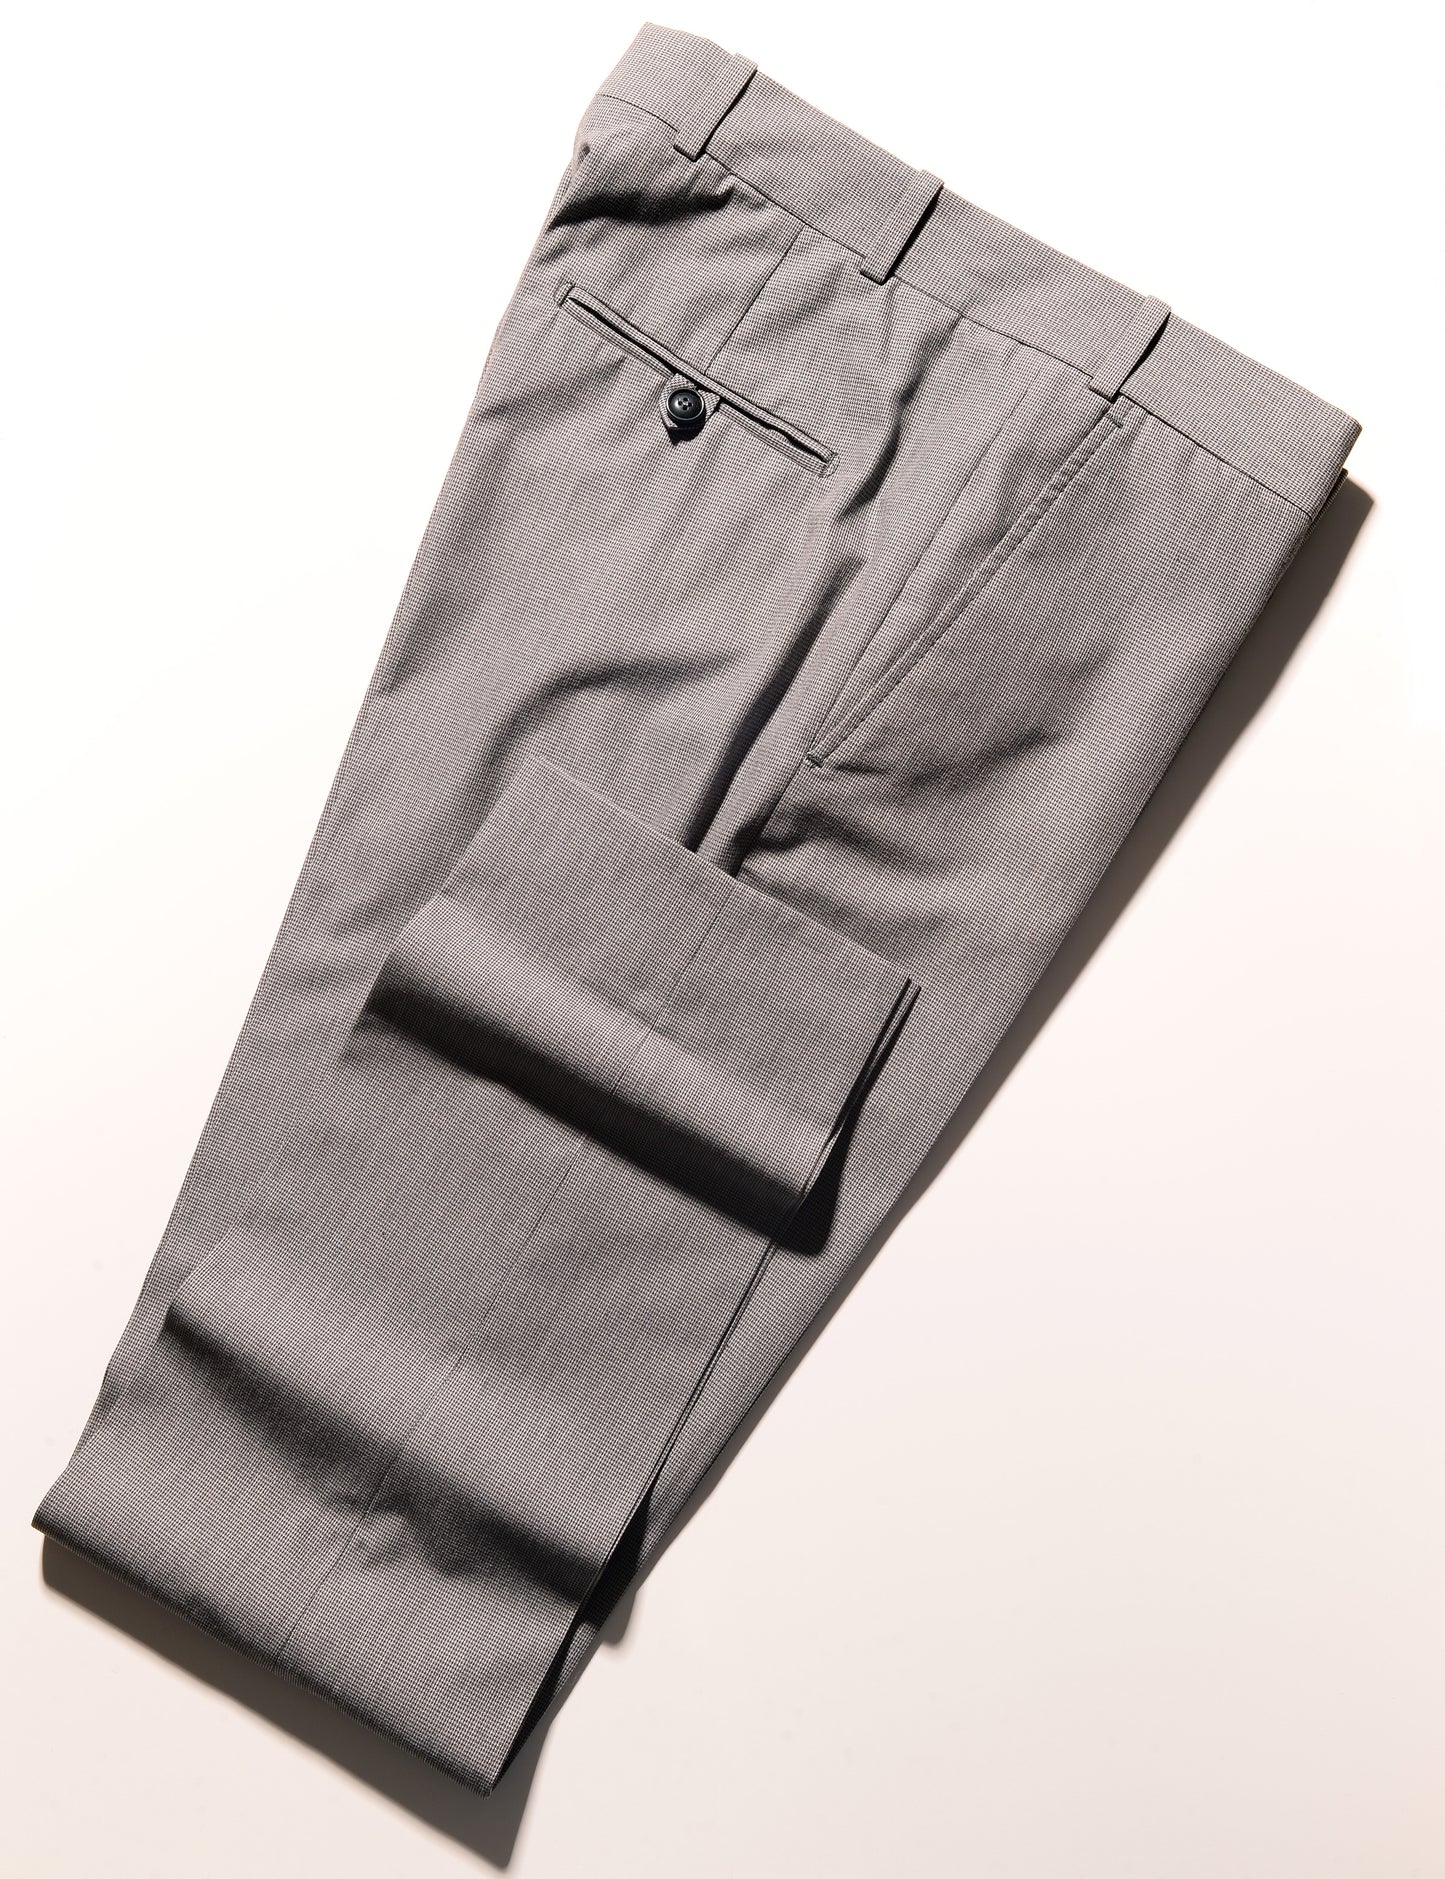 BKT50 Tailored Trousers in Cotton Micro Weave - Graphite